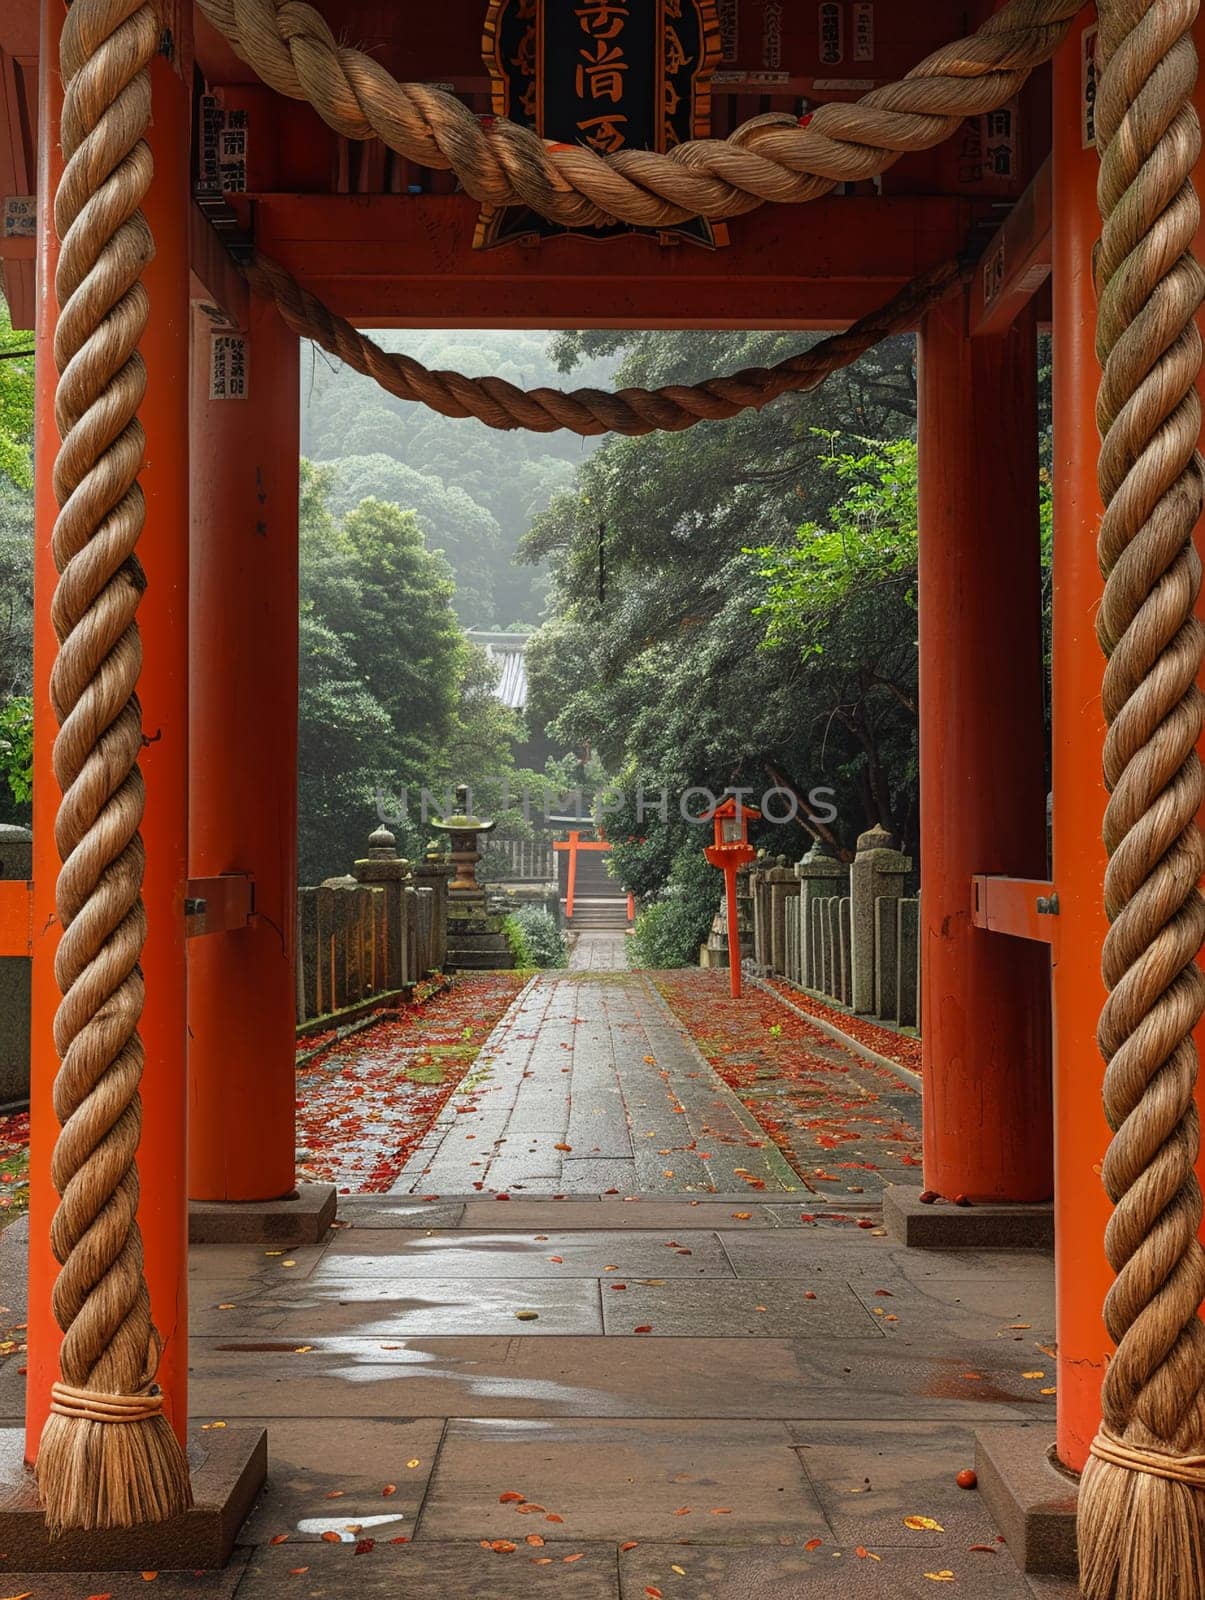 Shinto Sacred Rope Marking the Entrance to a Spiritual Space The rope blends into the shrine by Benzoix